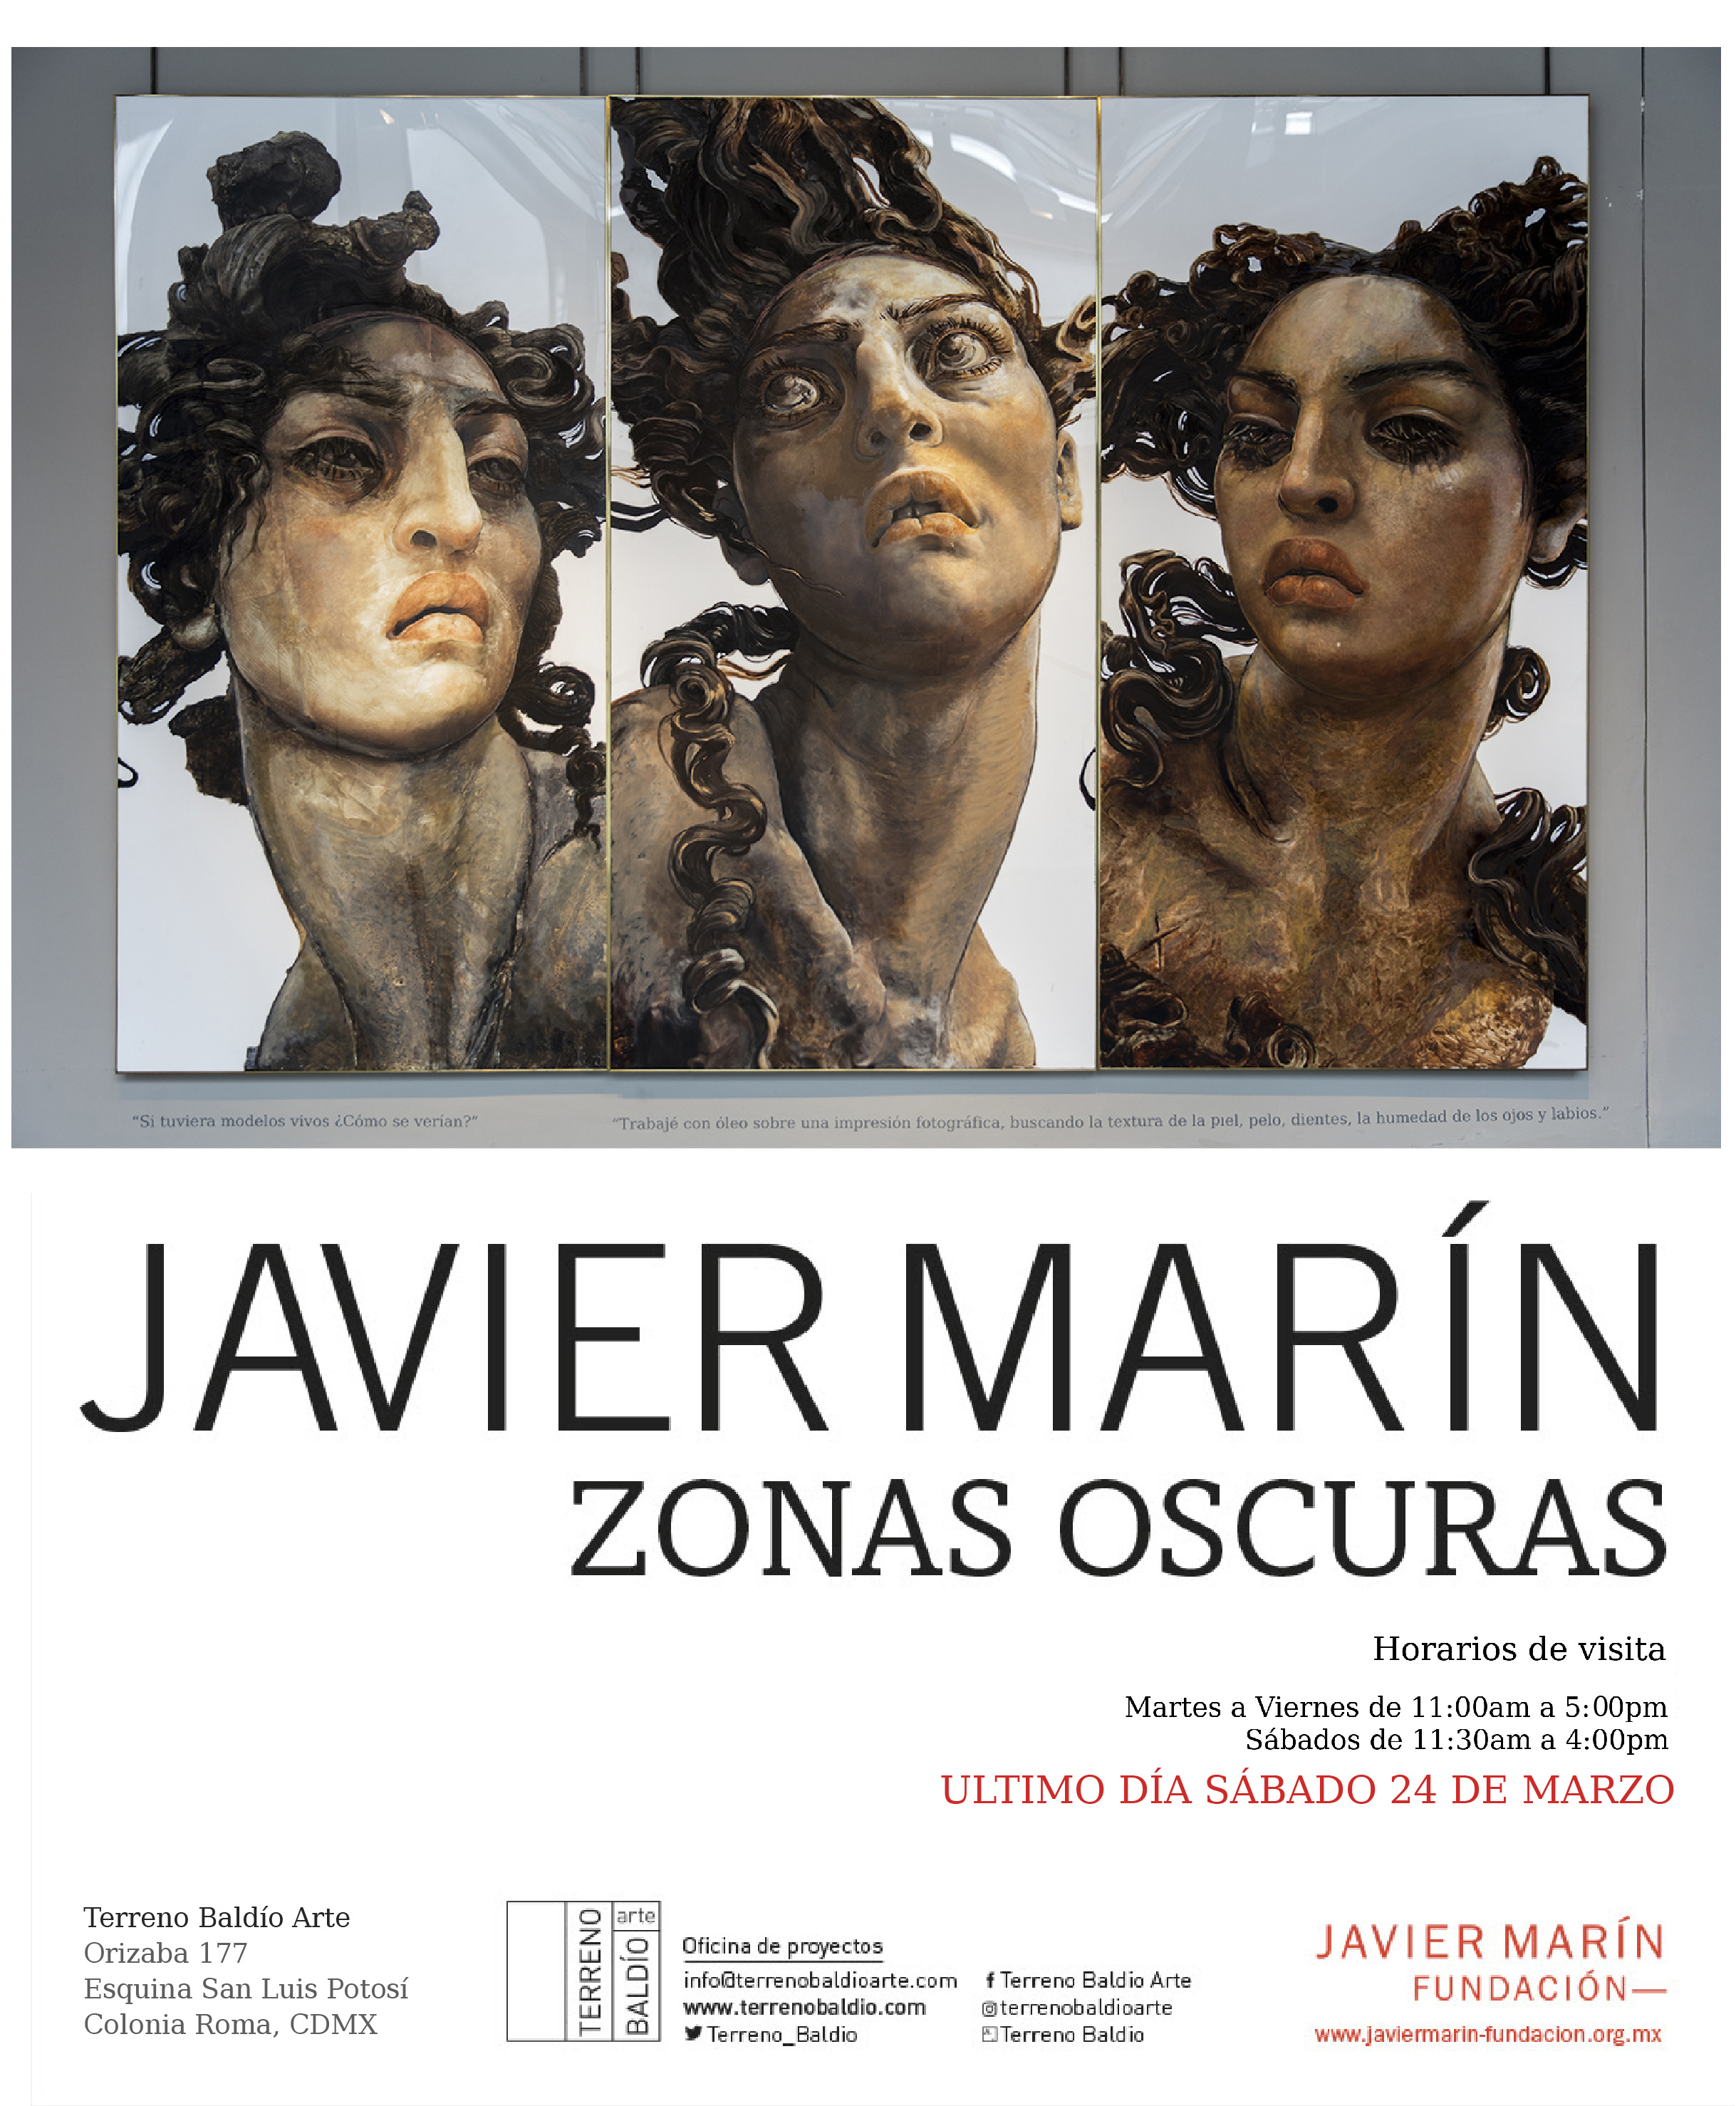 Javier Marín Zonas Oscuras Last opening day saturday march 24th